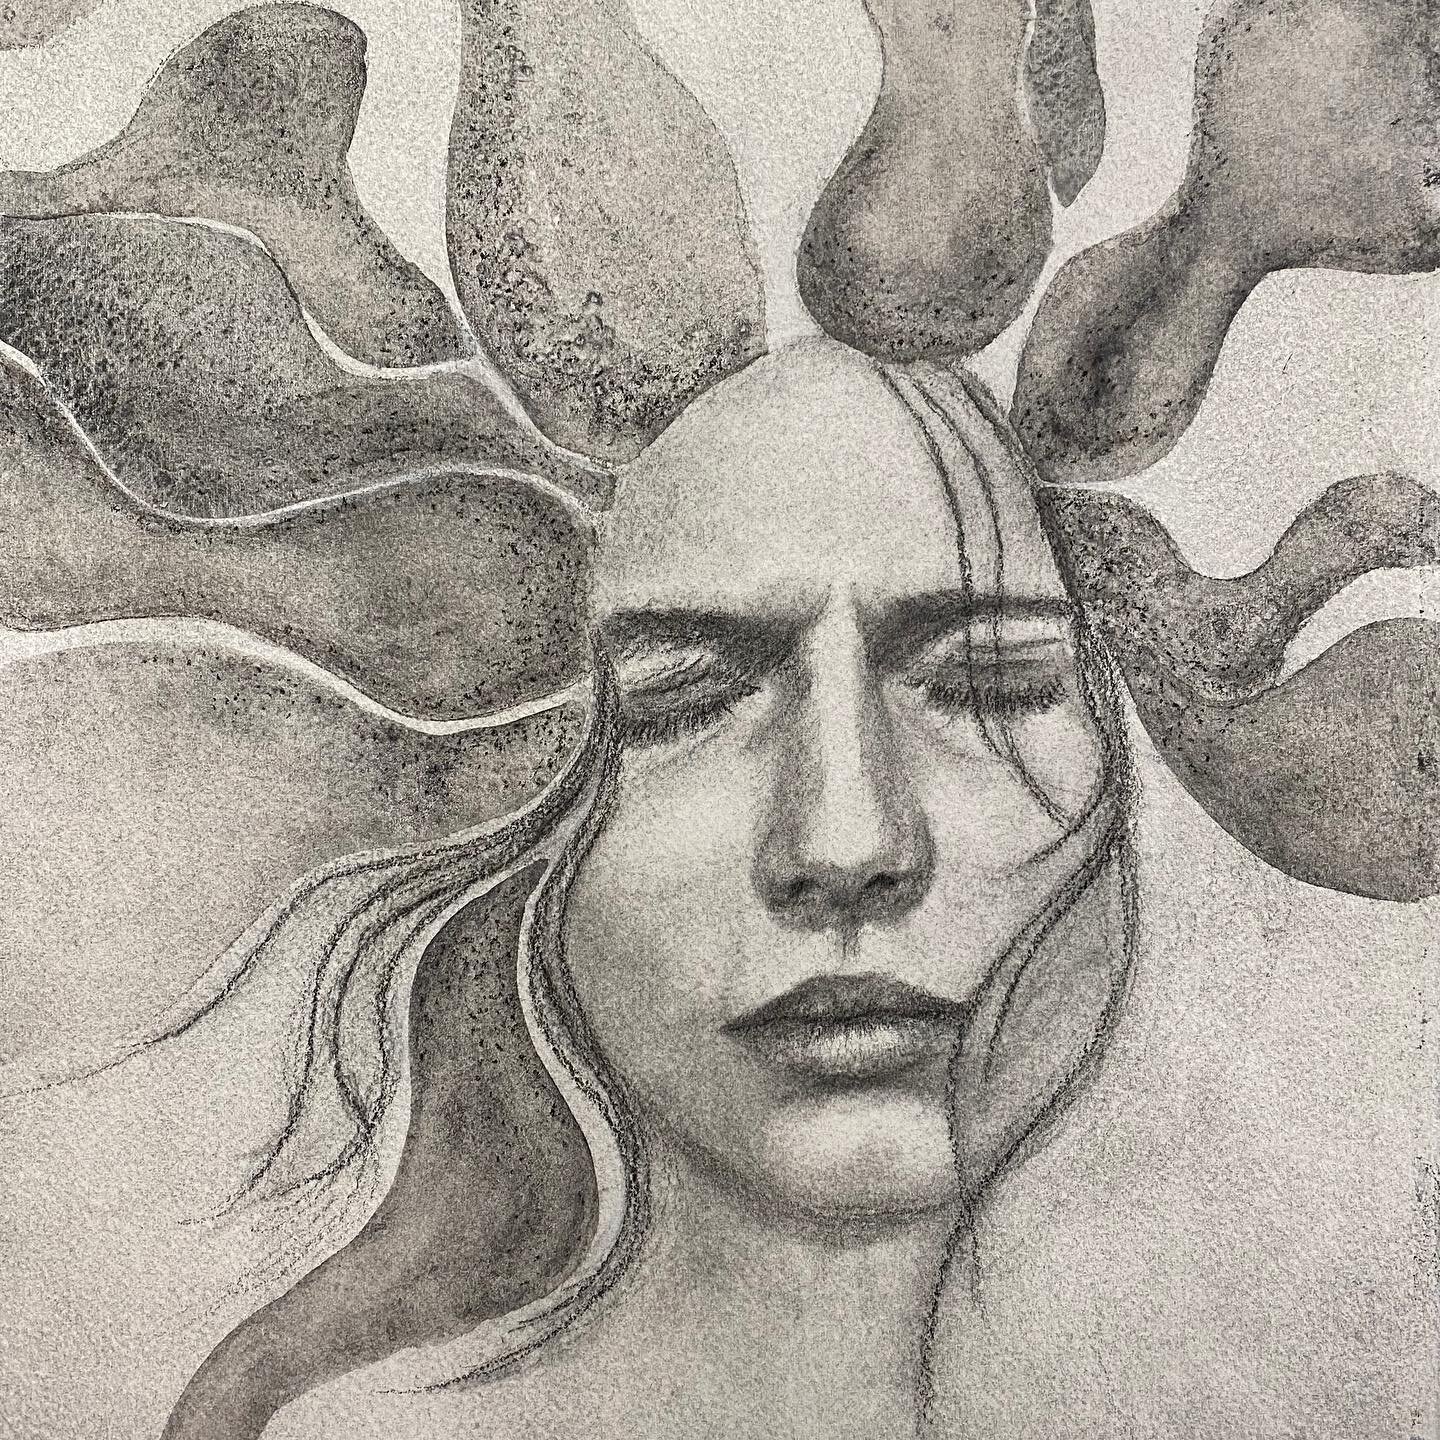 Charcoal and watercolor on arches paper, titled: 2020. 

When I don&rsquo;t have the words. 

#art #artofinstagram #artistsoninstagram #charcoaldrawing #charcoalart #portrait #charcoalportrait #covidart #pnwartist #pnwart #mentalhealthmatters #coping